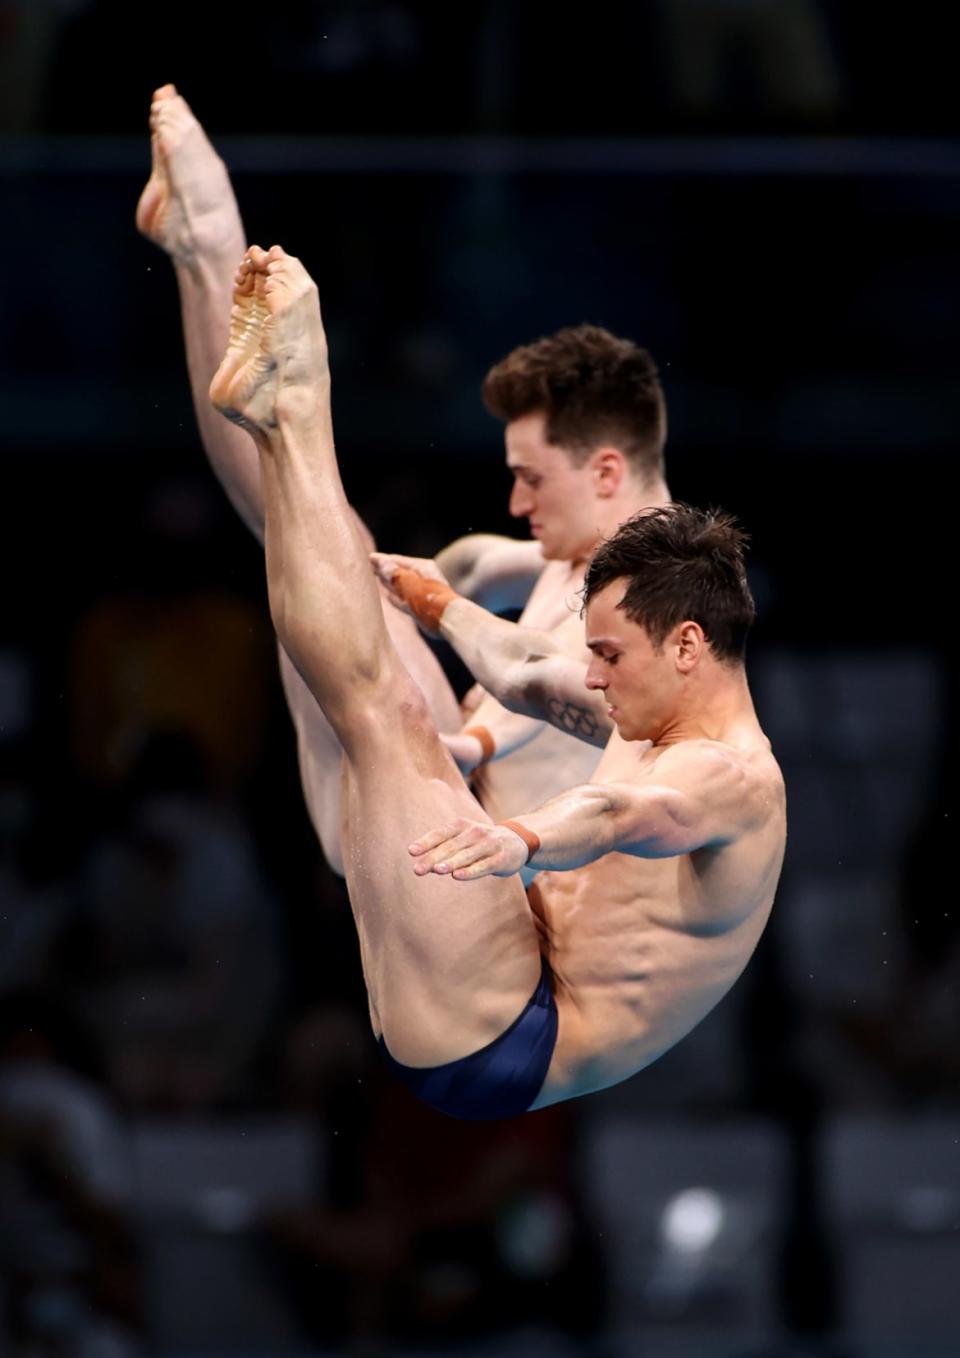 <div class="inline-image__caption"> <p>Tom Daley and Matty Lee of Team Great Britain on day three of the Tokyo 2020 Olympic Games on July 26, 2021.</p> </div> <div class="inline-image__credit"> Davis Ramos/Getty </div>